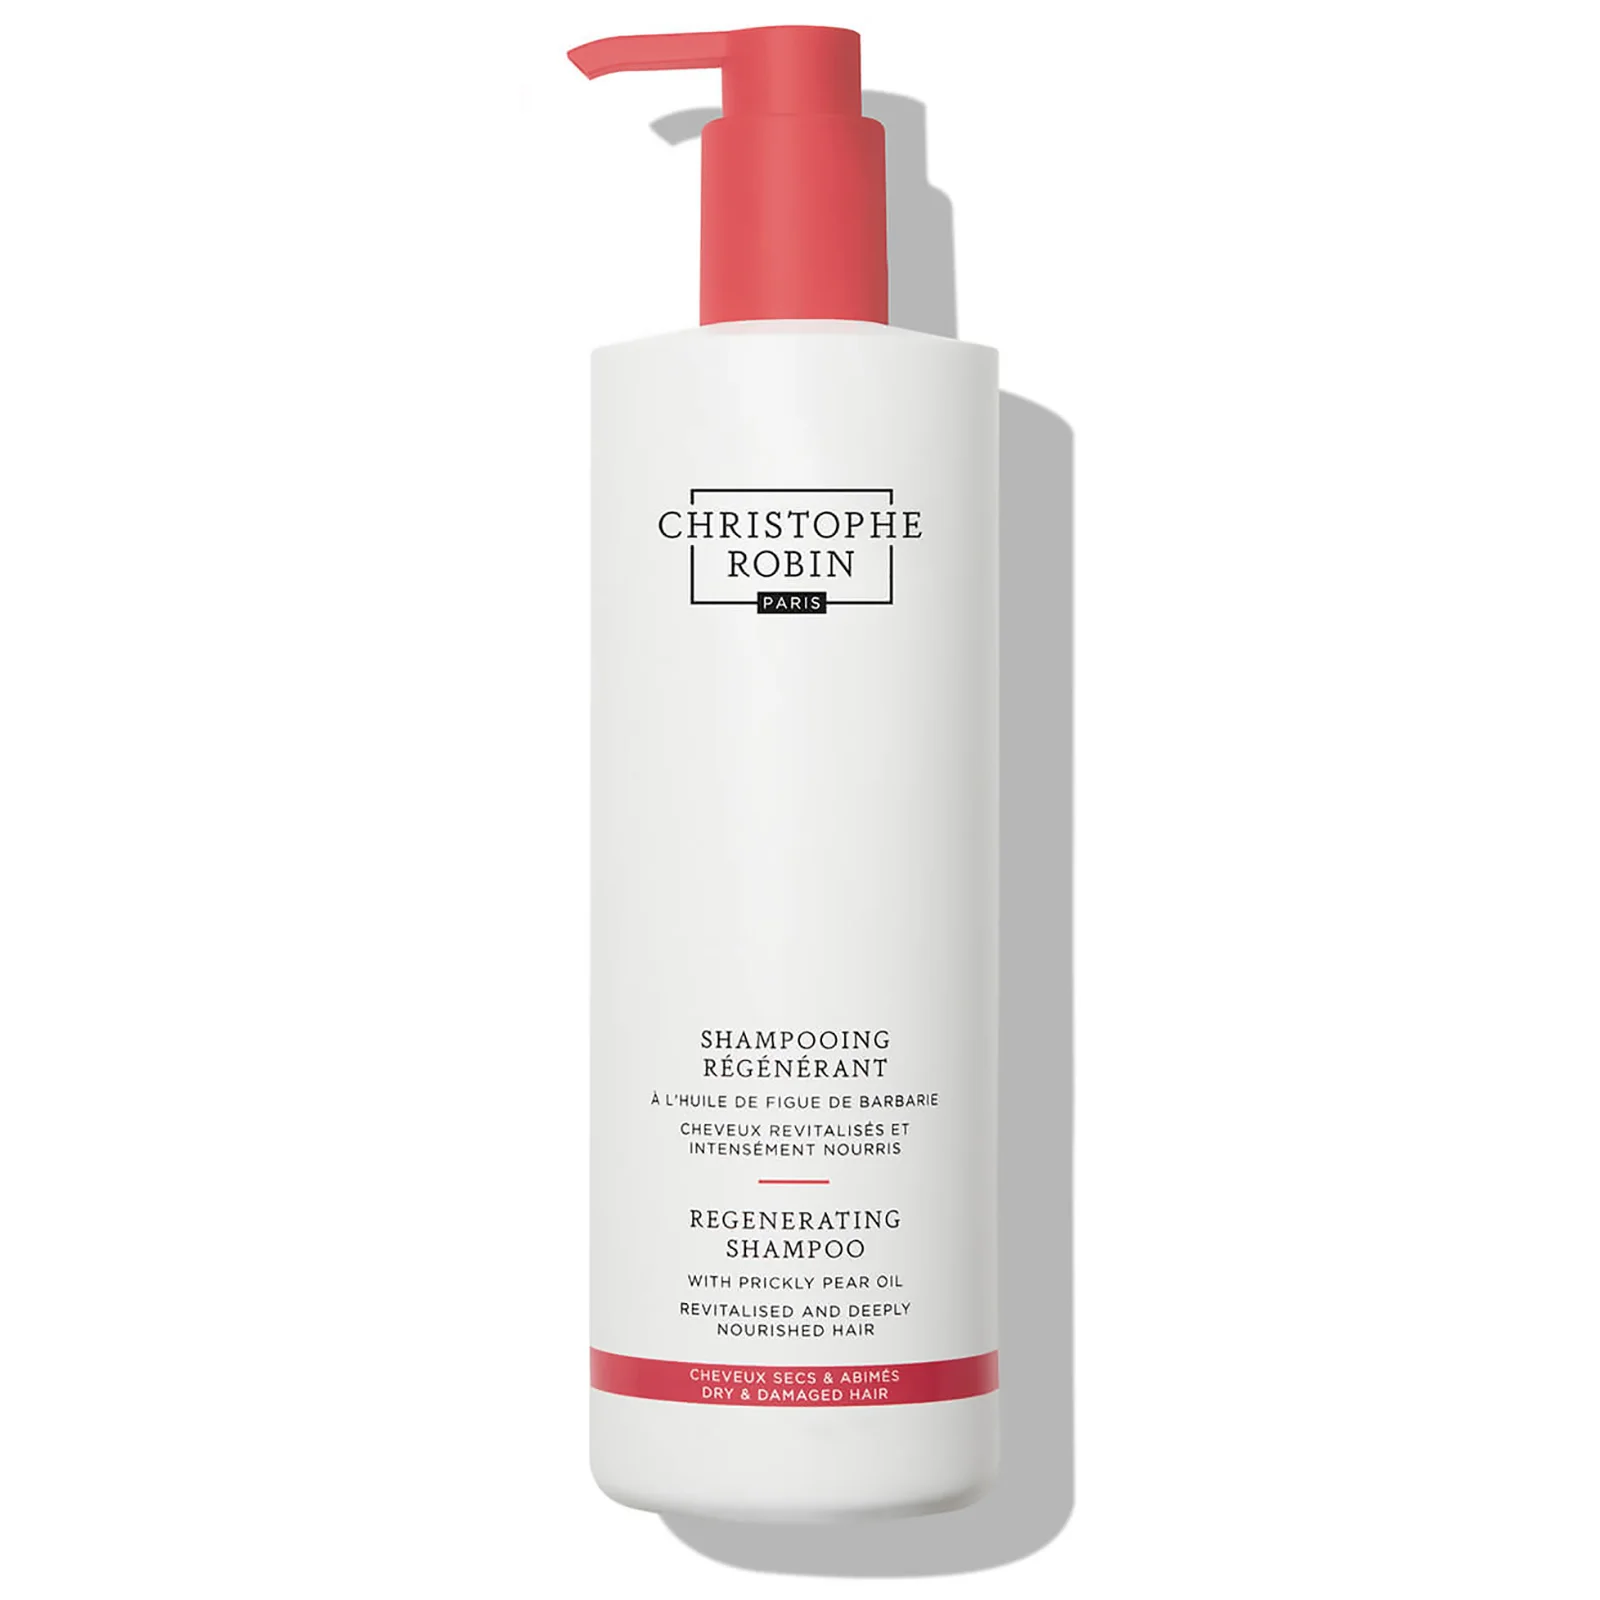 Christophe Robin Regenerating Shampoo with Prickly Pear Oil 500ml Image 1